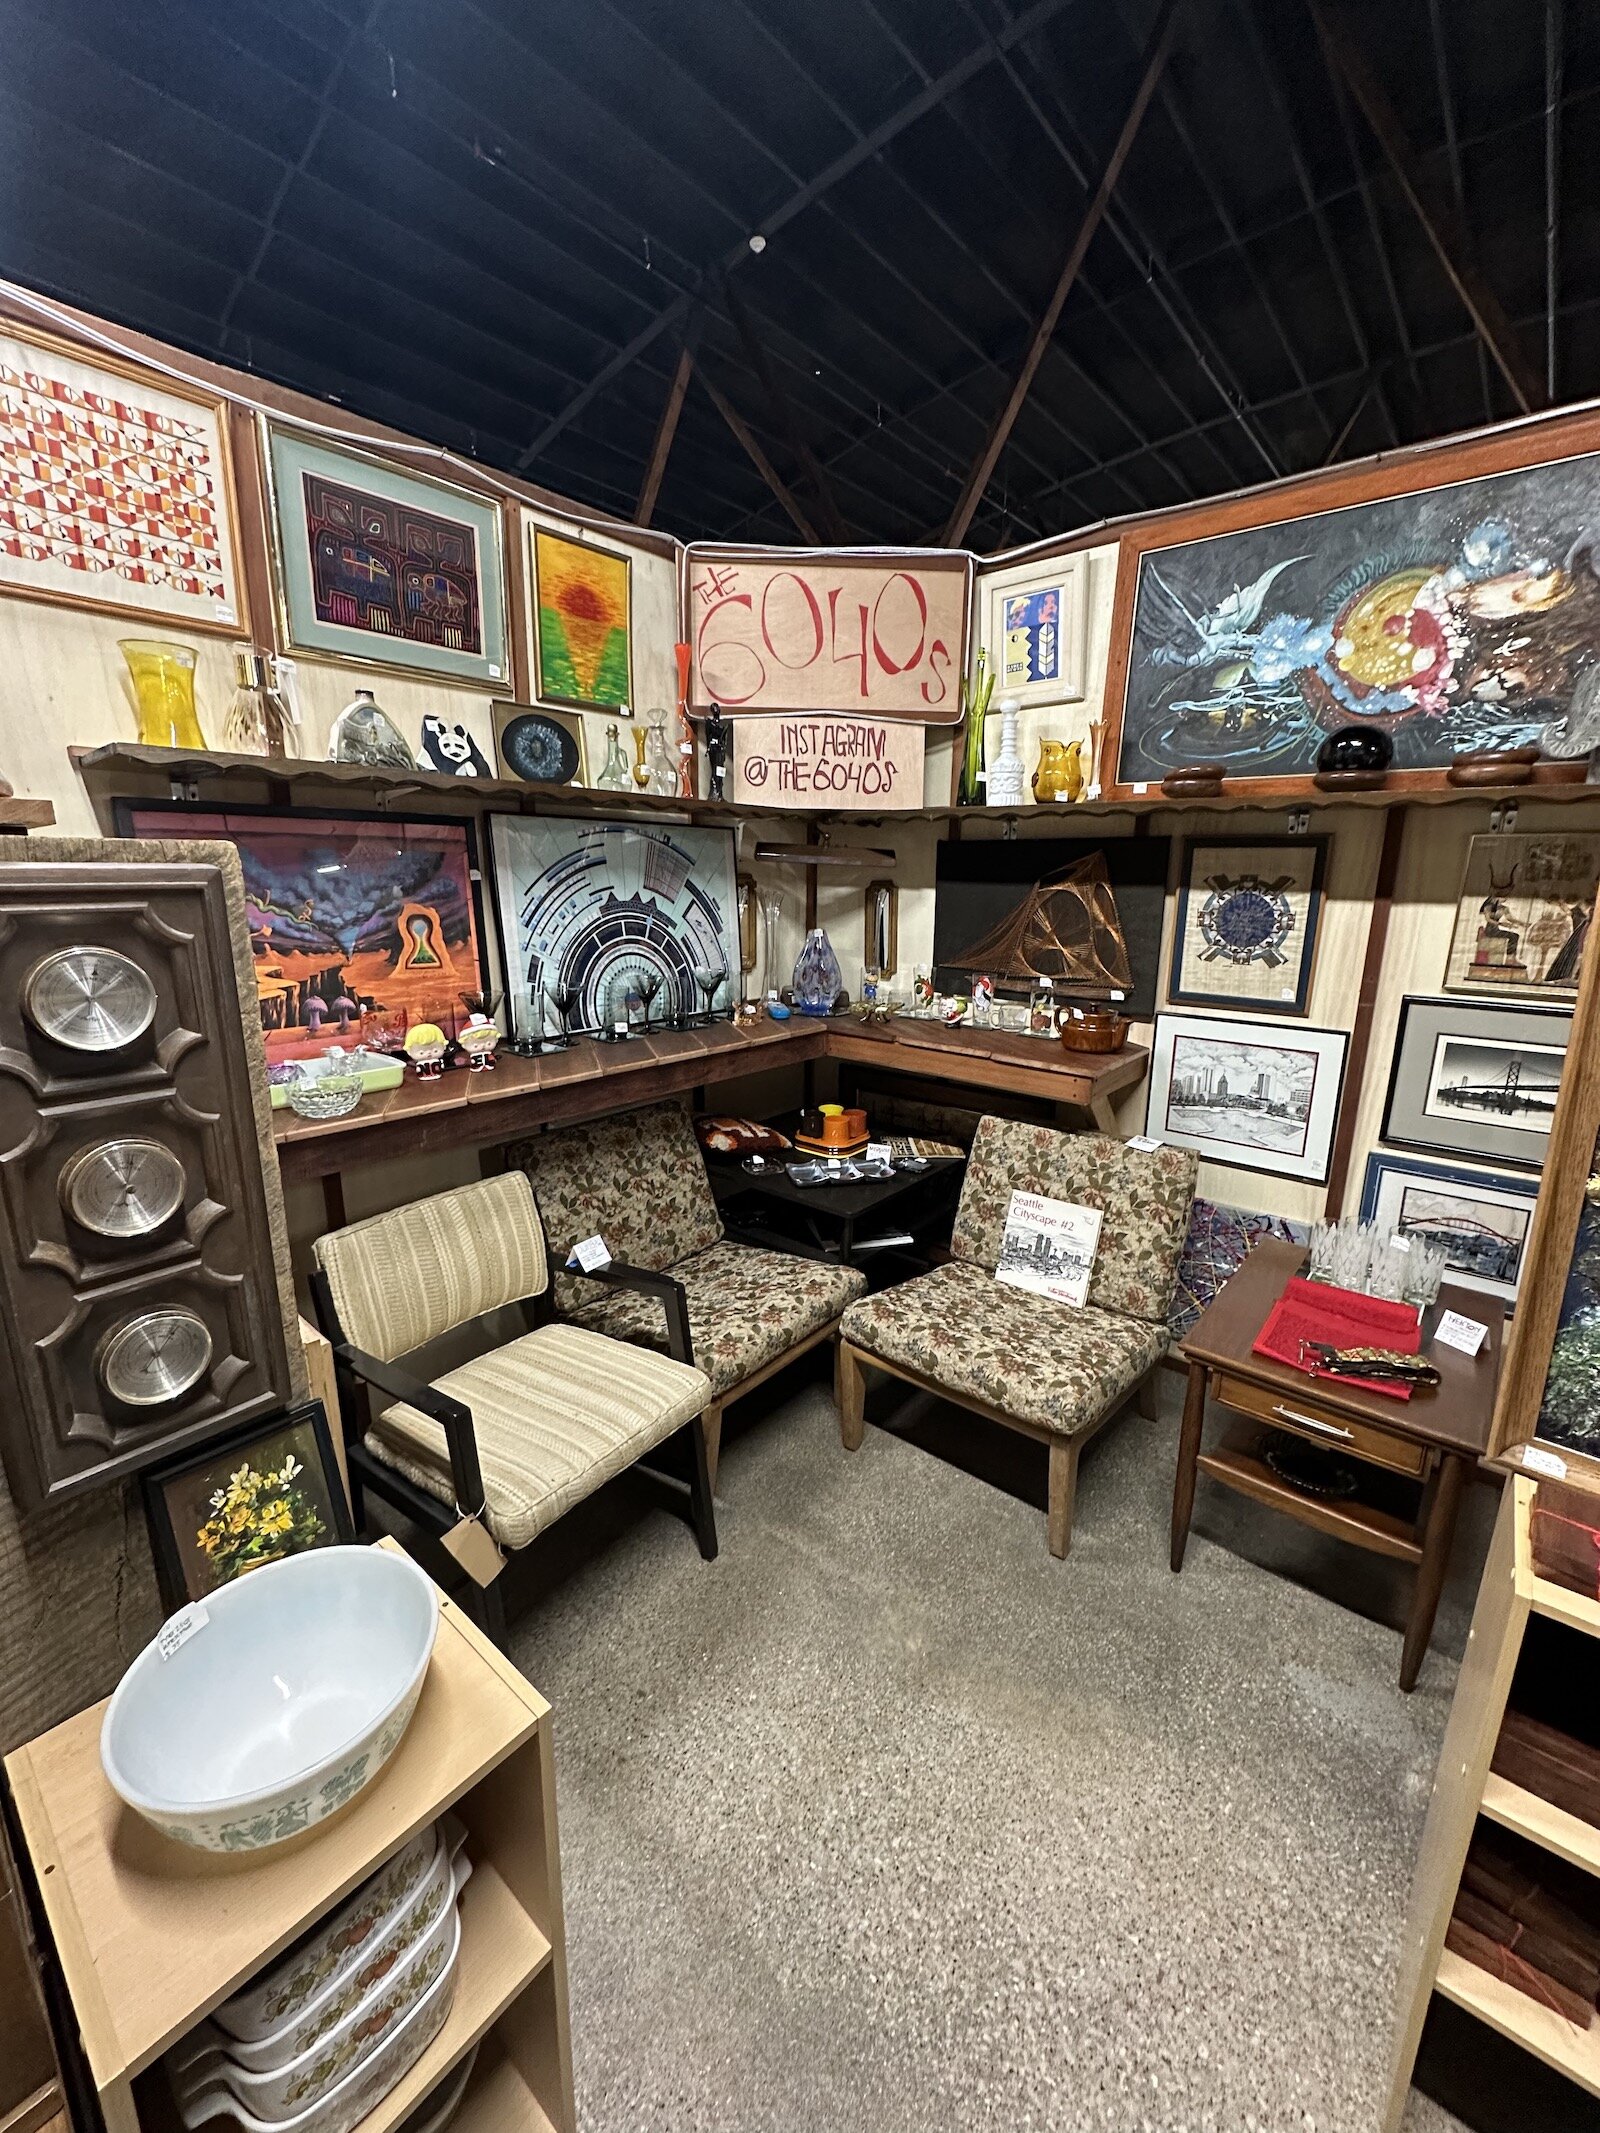 A booth run by The 6040s, a small mid-century shop in Fort Wayne.